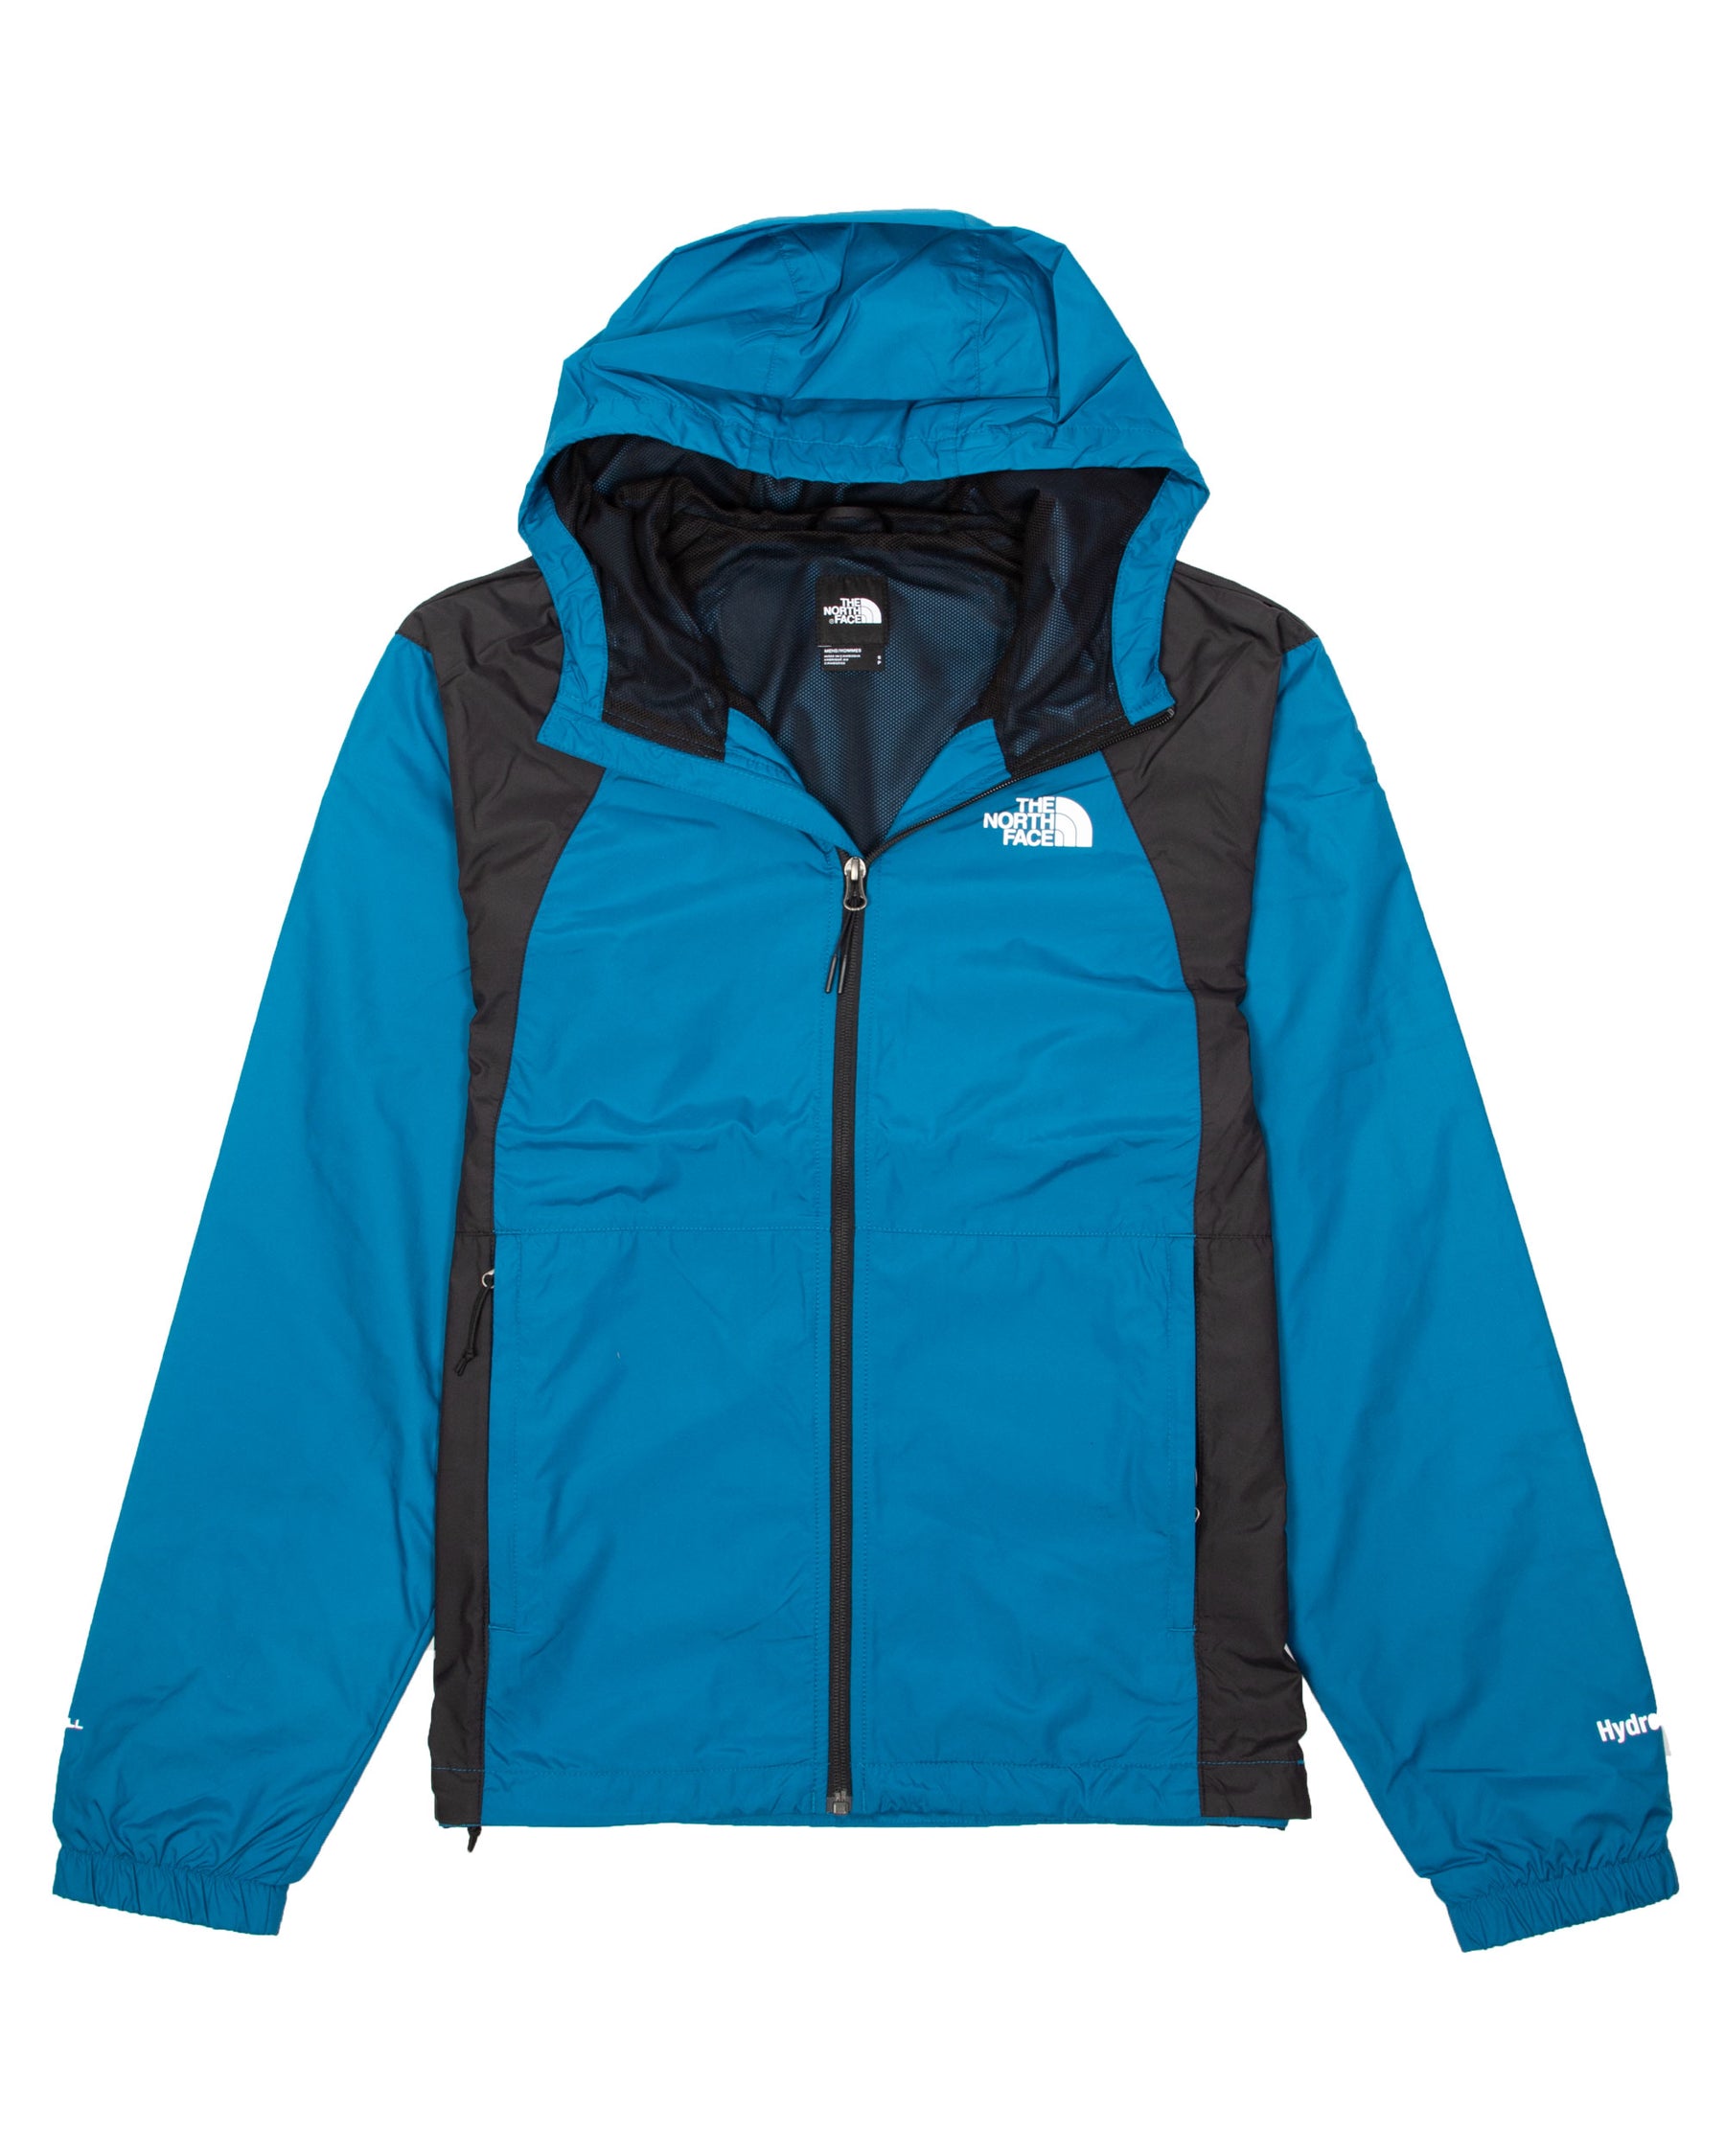 Man Jacket The North Face M Hydrnline blue